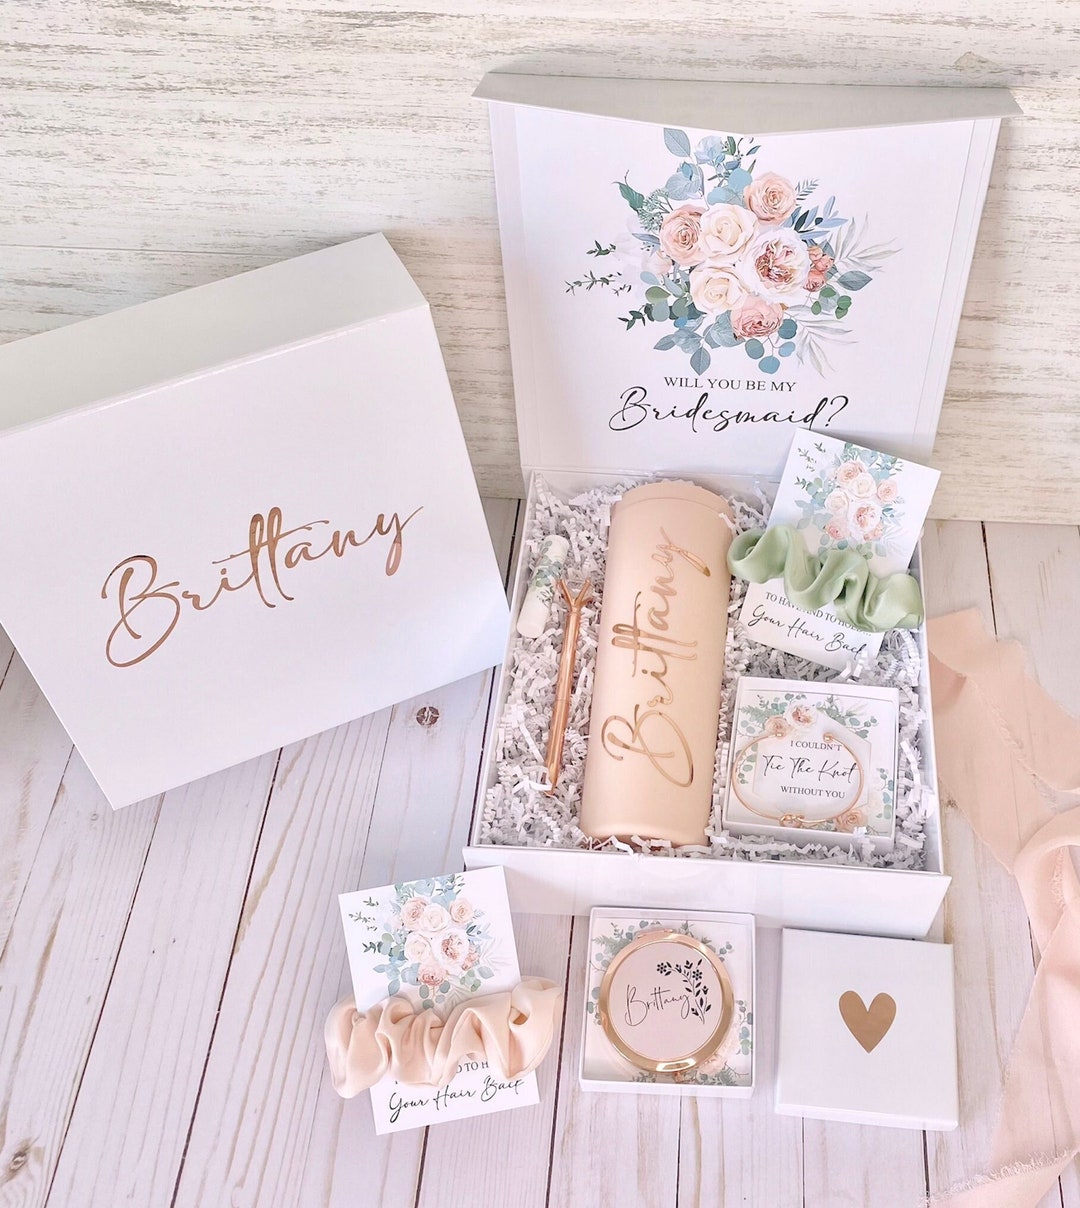 Bridesmaid Proposal Gift Box Set | Personalized Bridesmaid Gifts | Bridal Party Gifts | Bachelorette Party Gifts | Will You Be My Bridesmaid